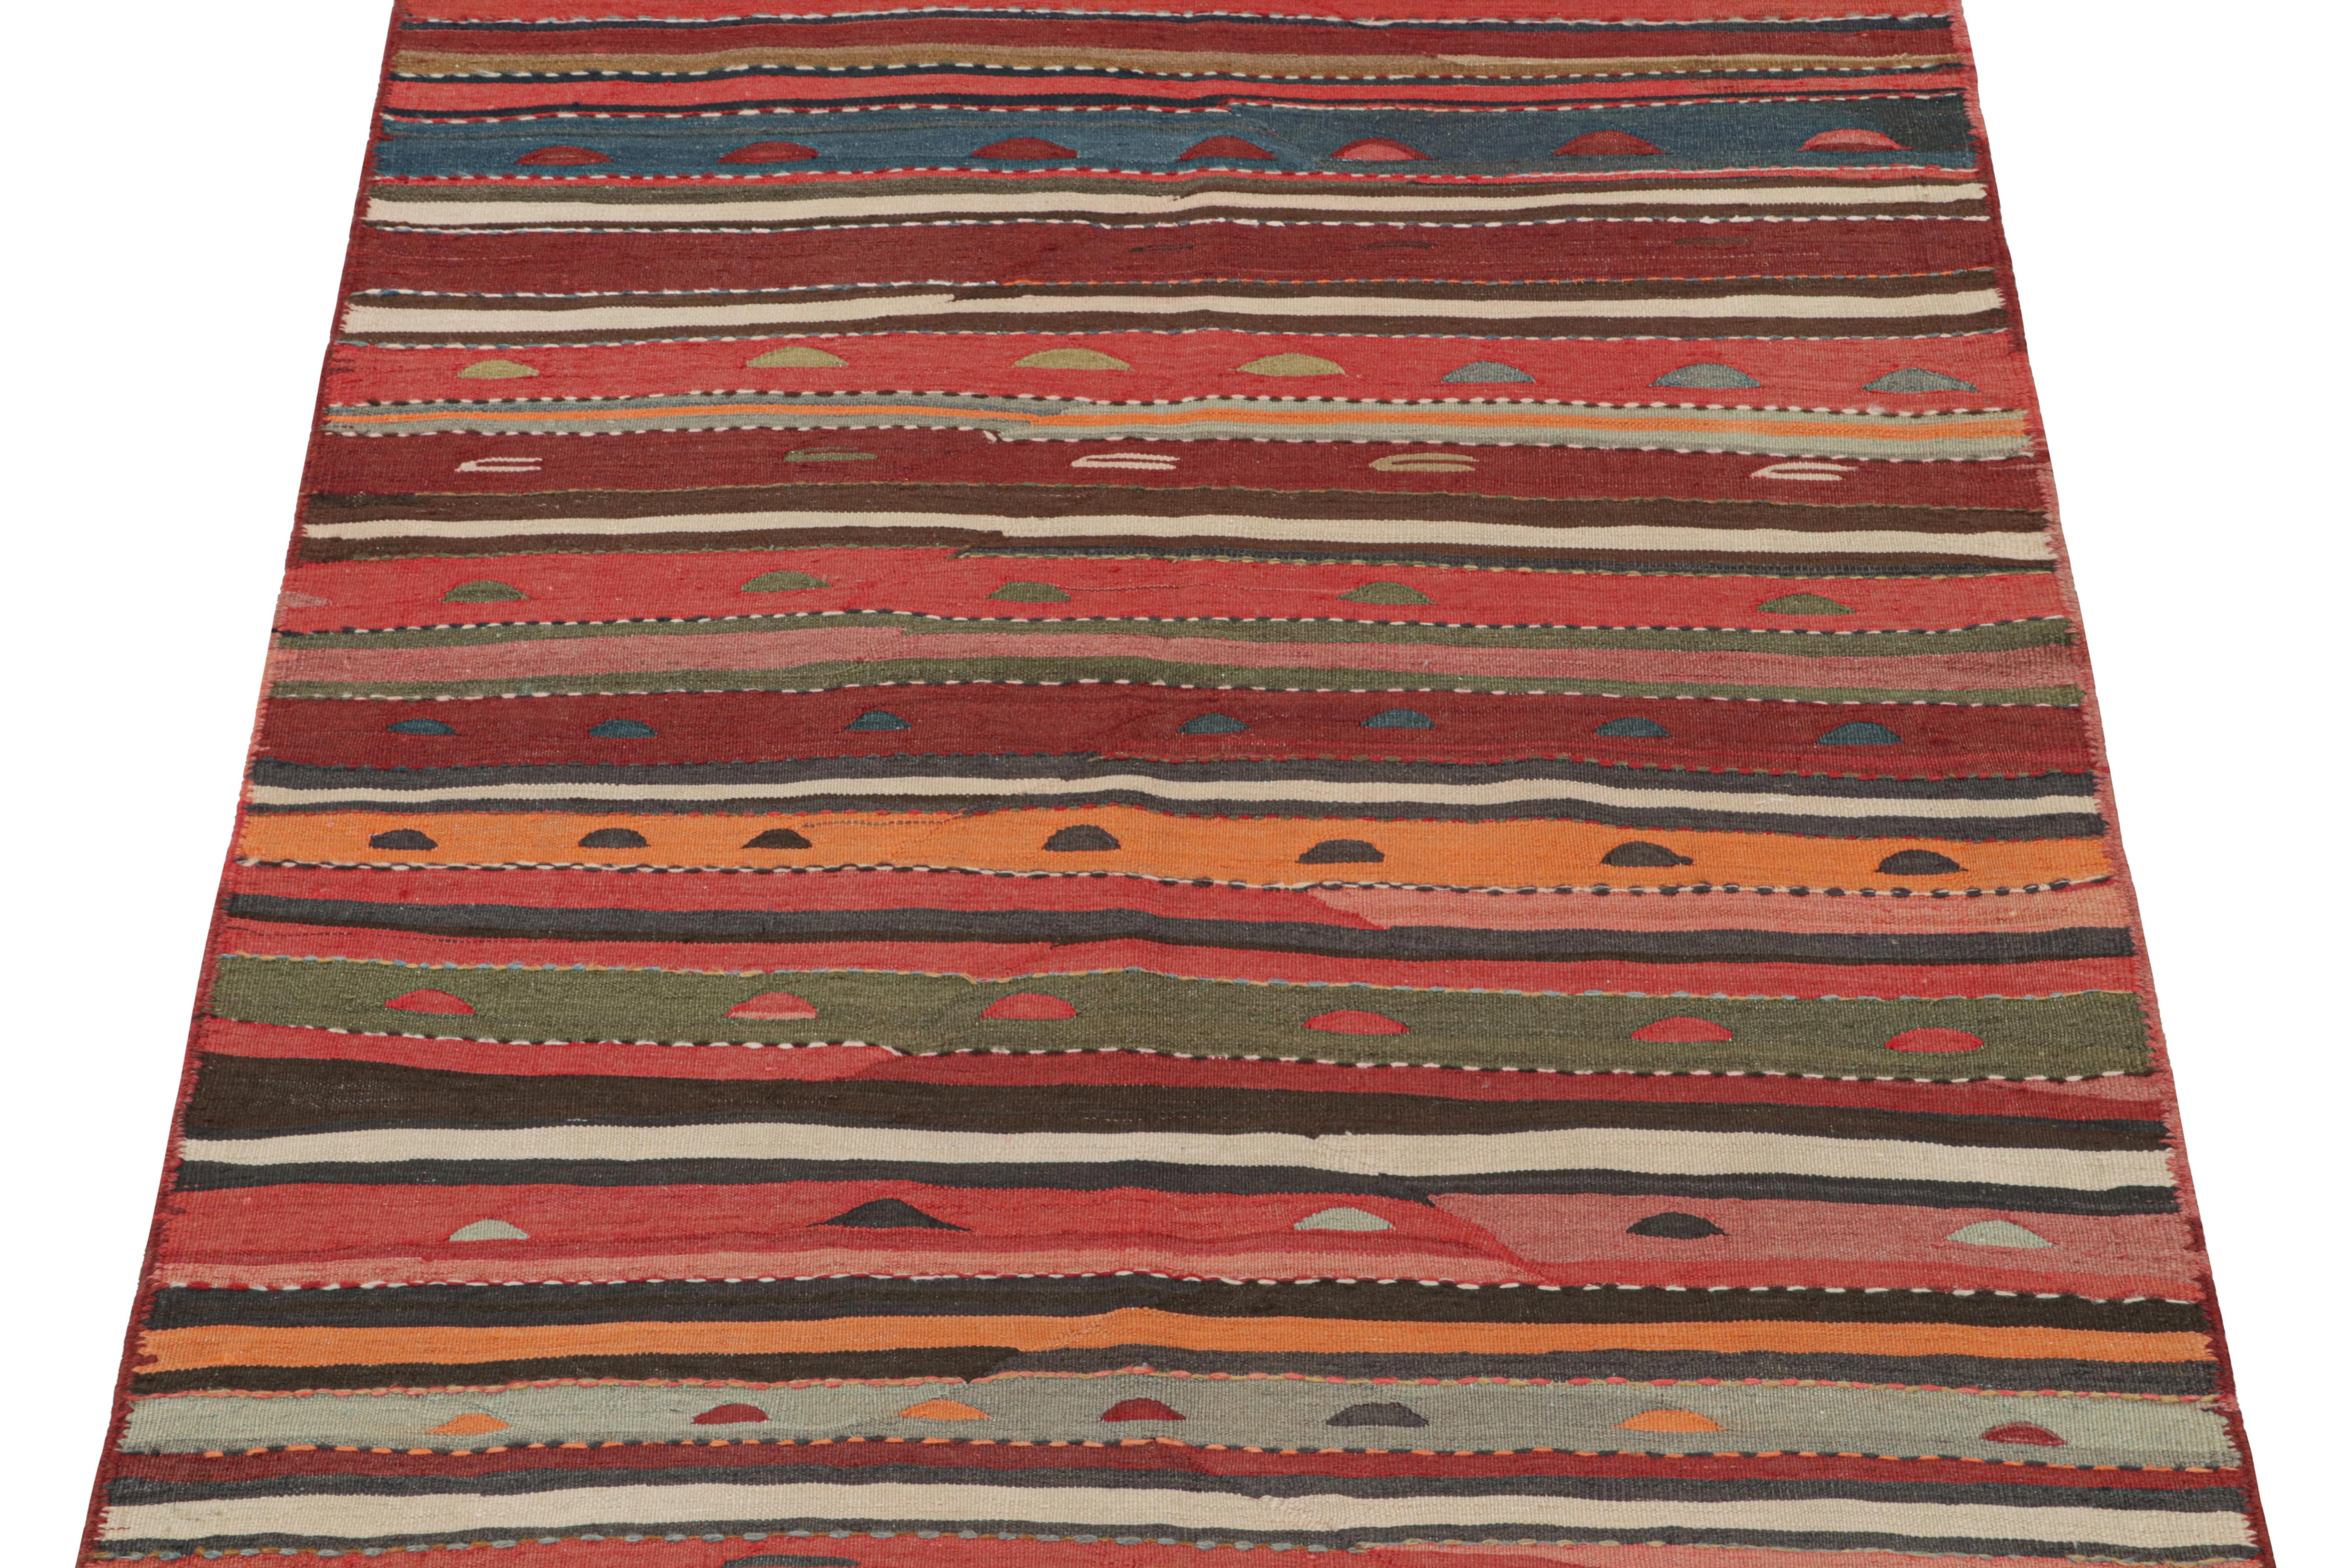 This vintage 4x6 Persian Kilim is a tribal rug from Meshkin—a small northwestern village in Iran known for its Craft. Handwoven in wool, it originates circa 1950-1960. 

Further on the Design:

Its design favors a polychromatic approach to